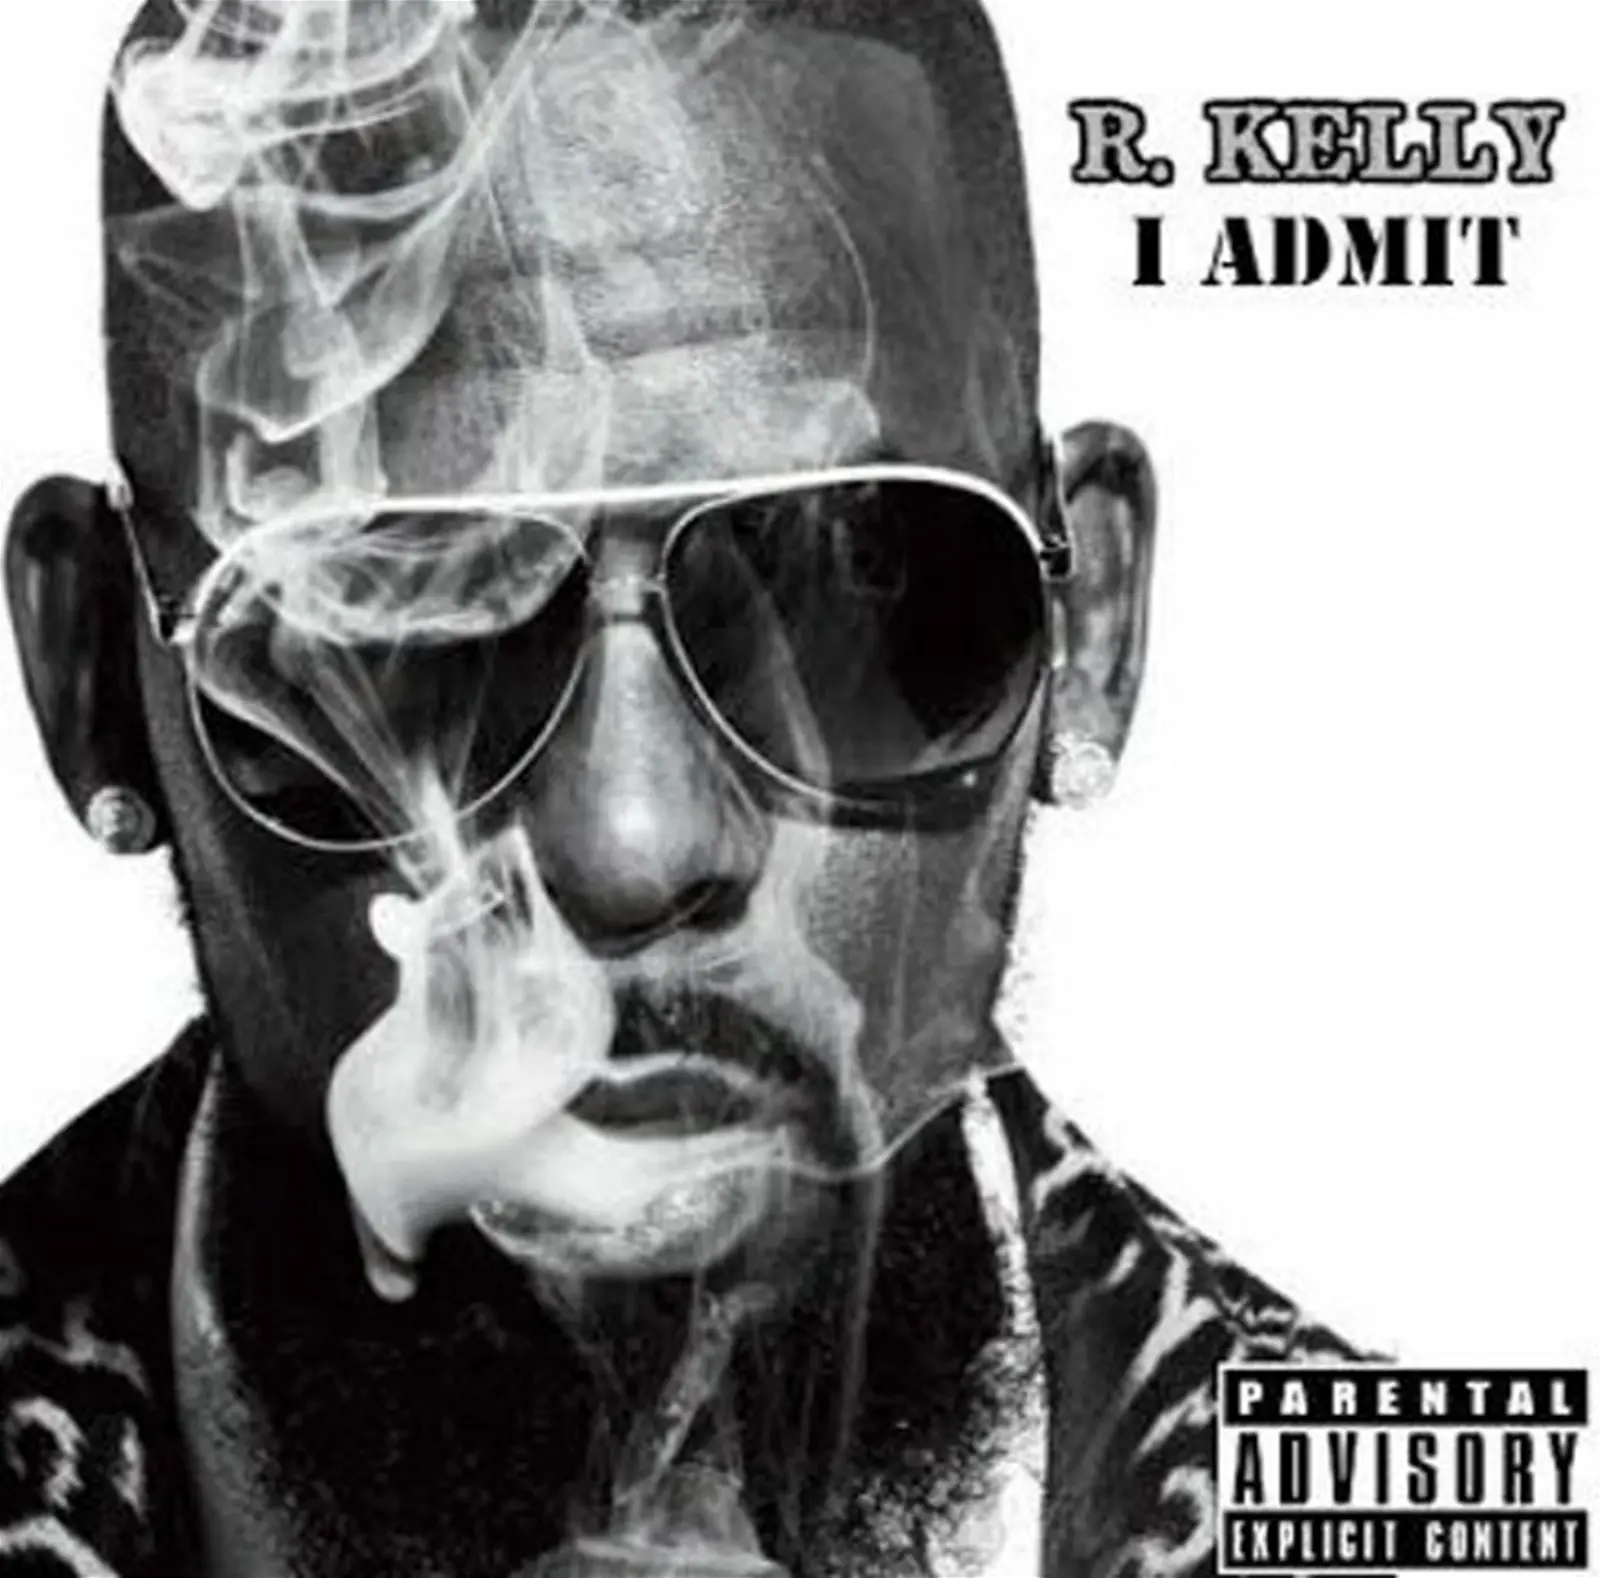 R. Kelly's new album, 'I Admit,' drops at Apple music, Spotify